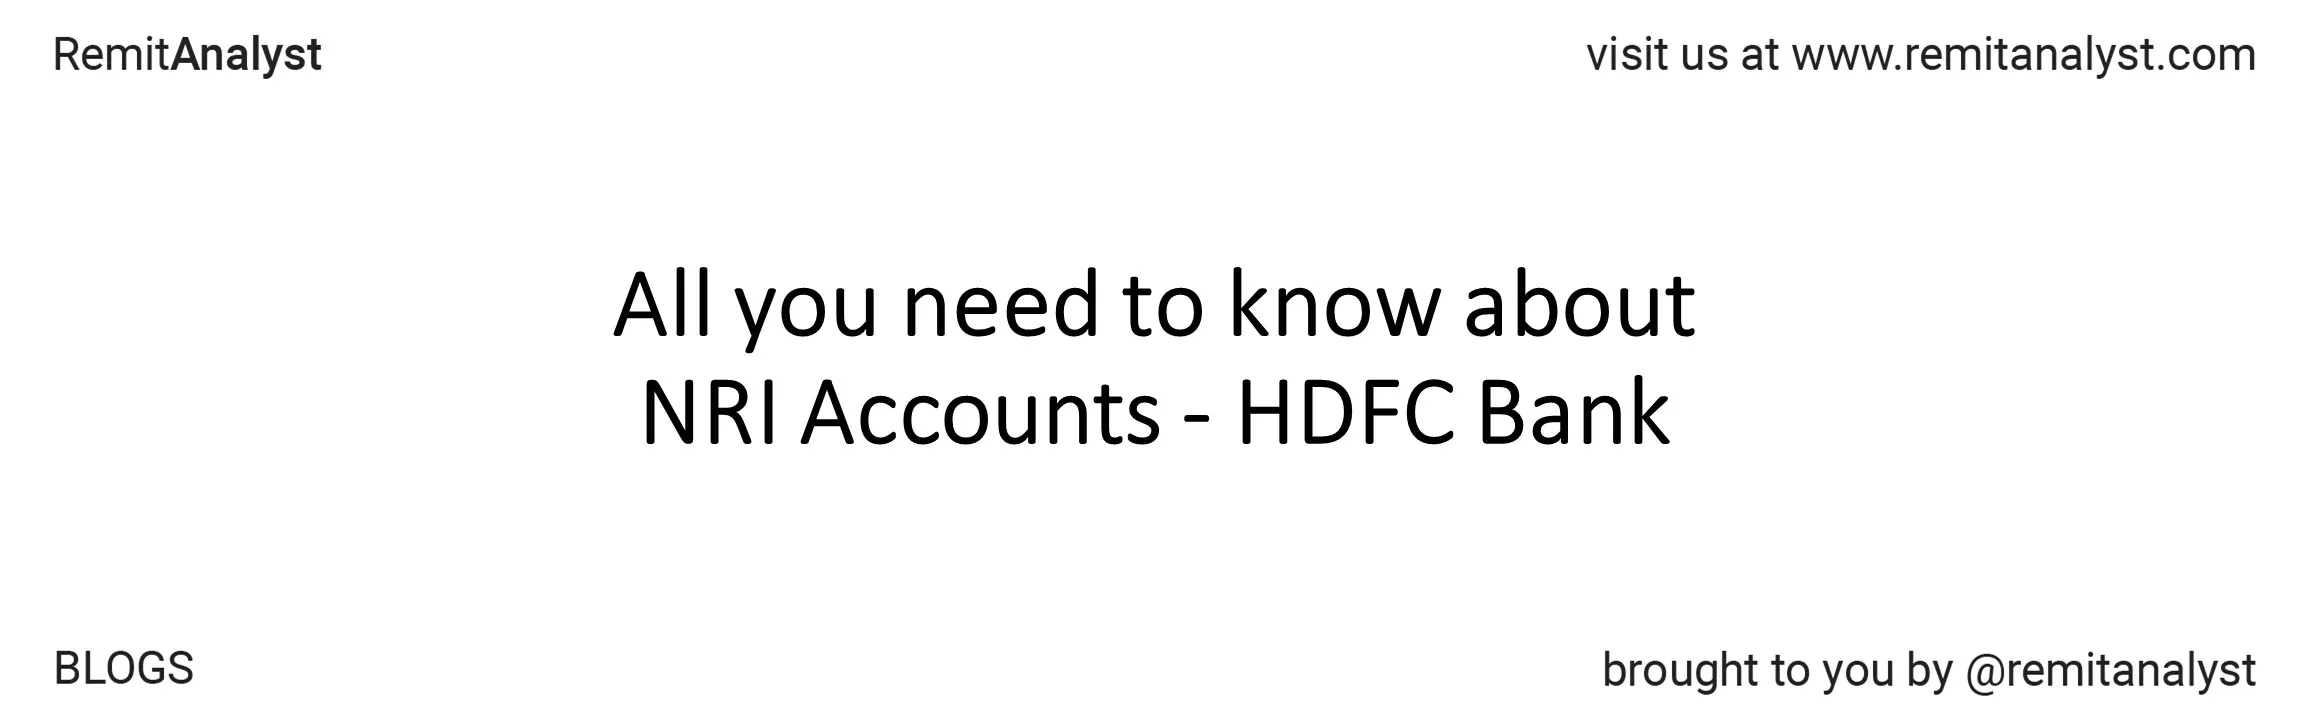 hdfc-bank-all-you-need-to-know-title